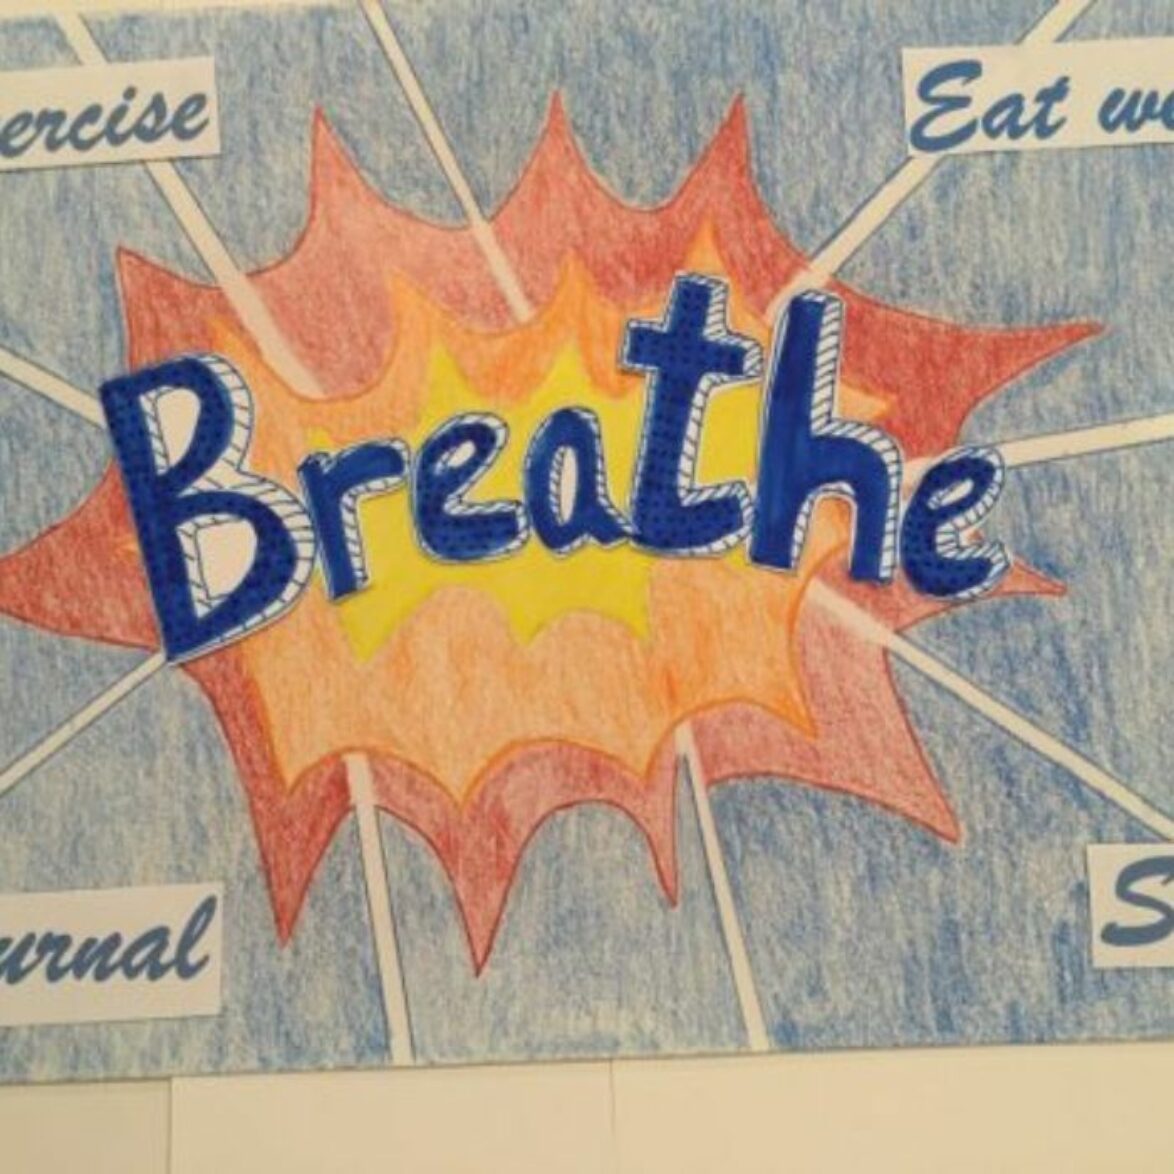 A hand-drawn poster with the word 'Breathe' in the centre of a starburst-type graphic. The words 'Exercise, Eat well, journal and sleep' are written, one in each of the four corners of the image is on